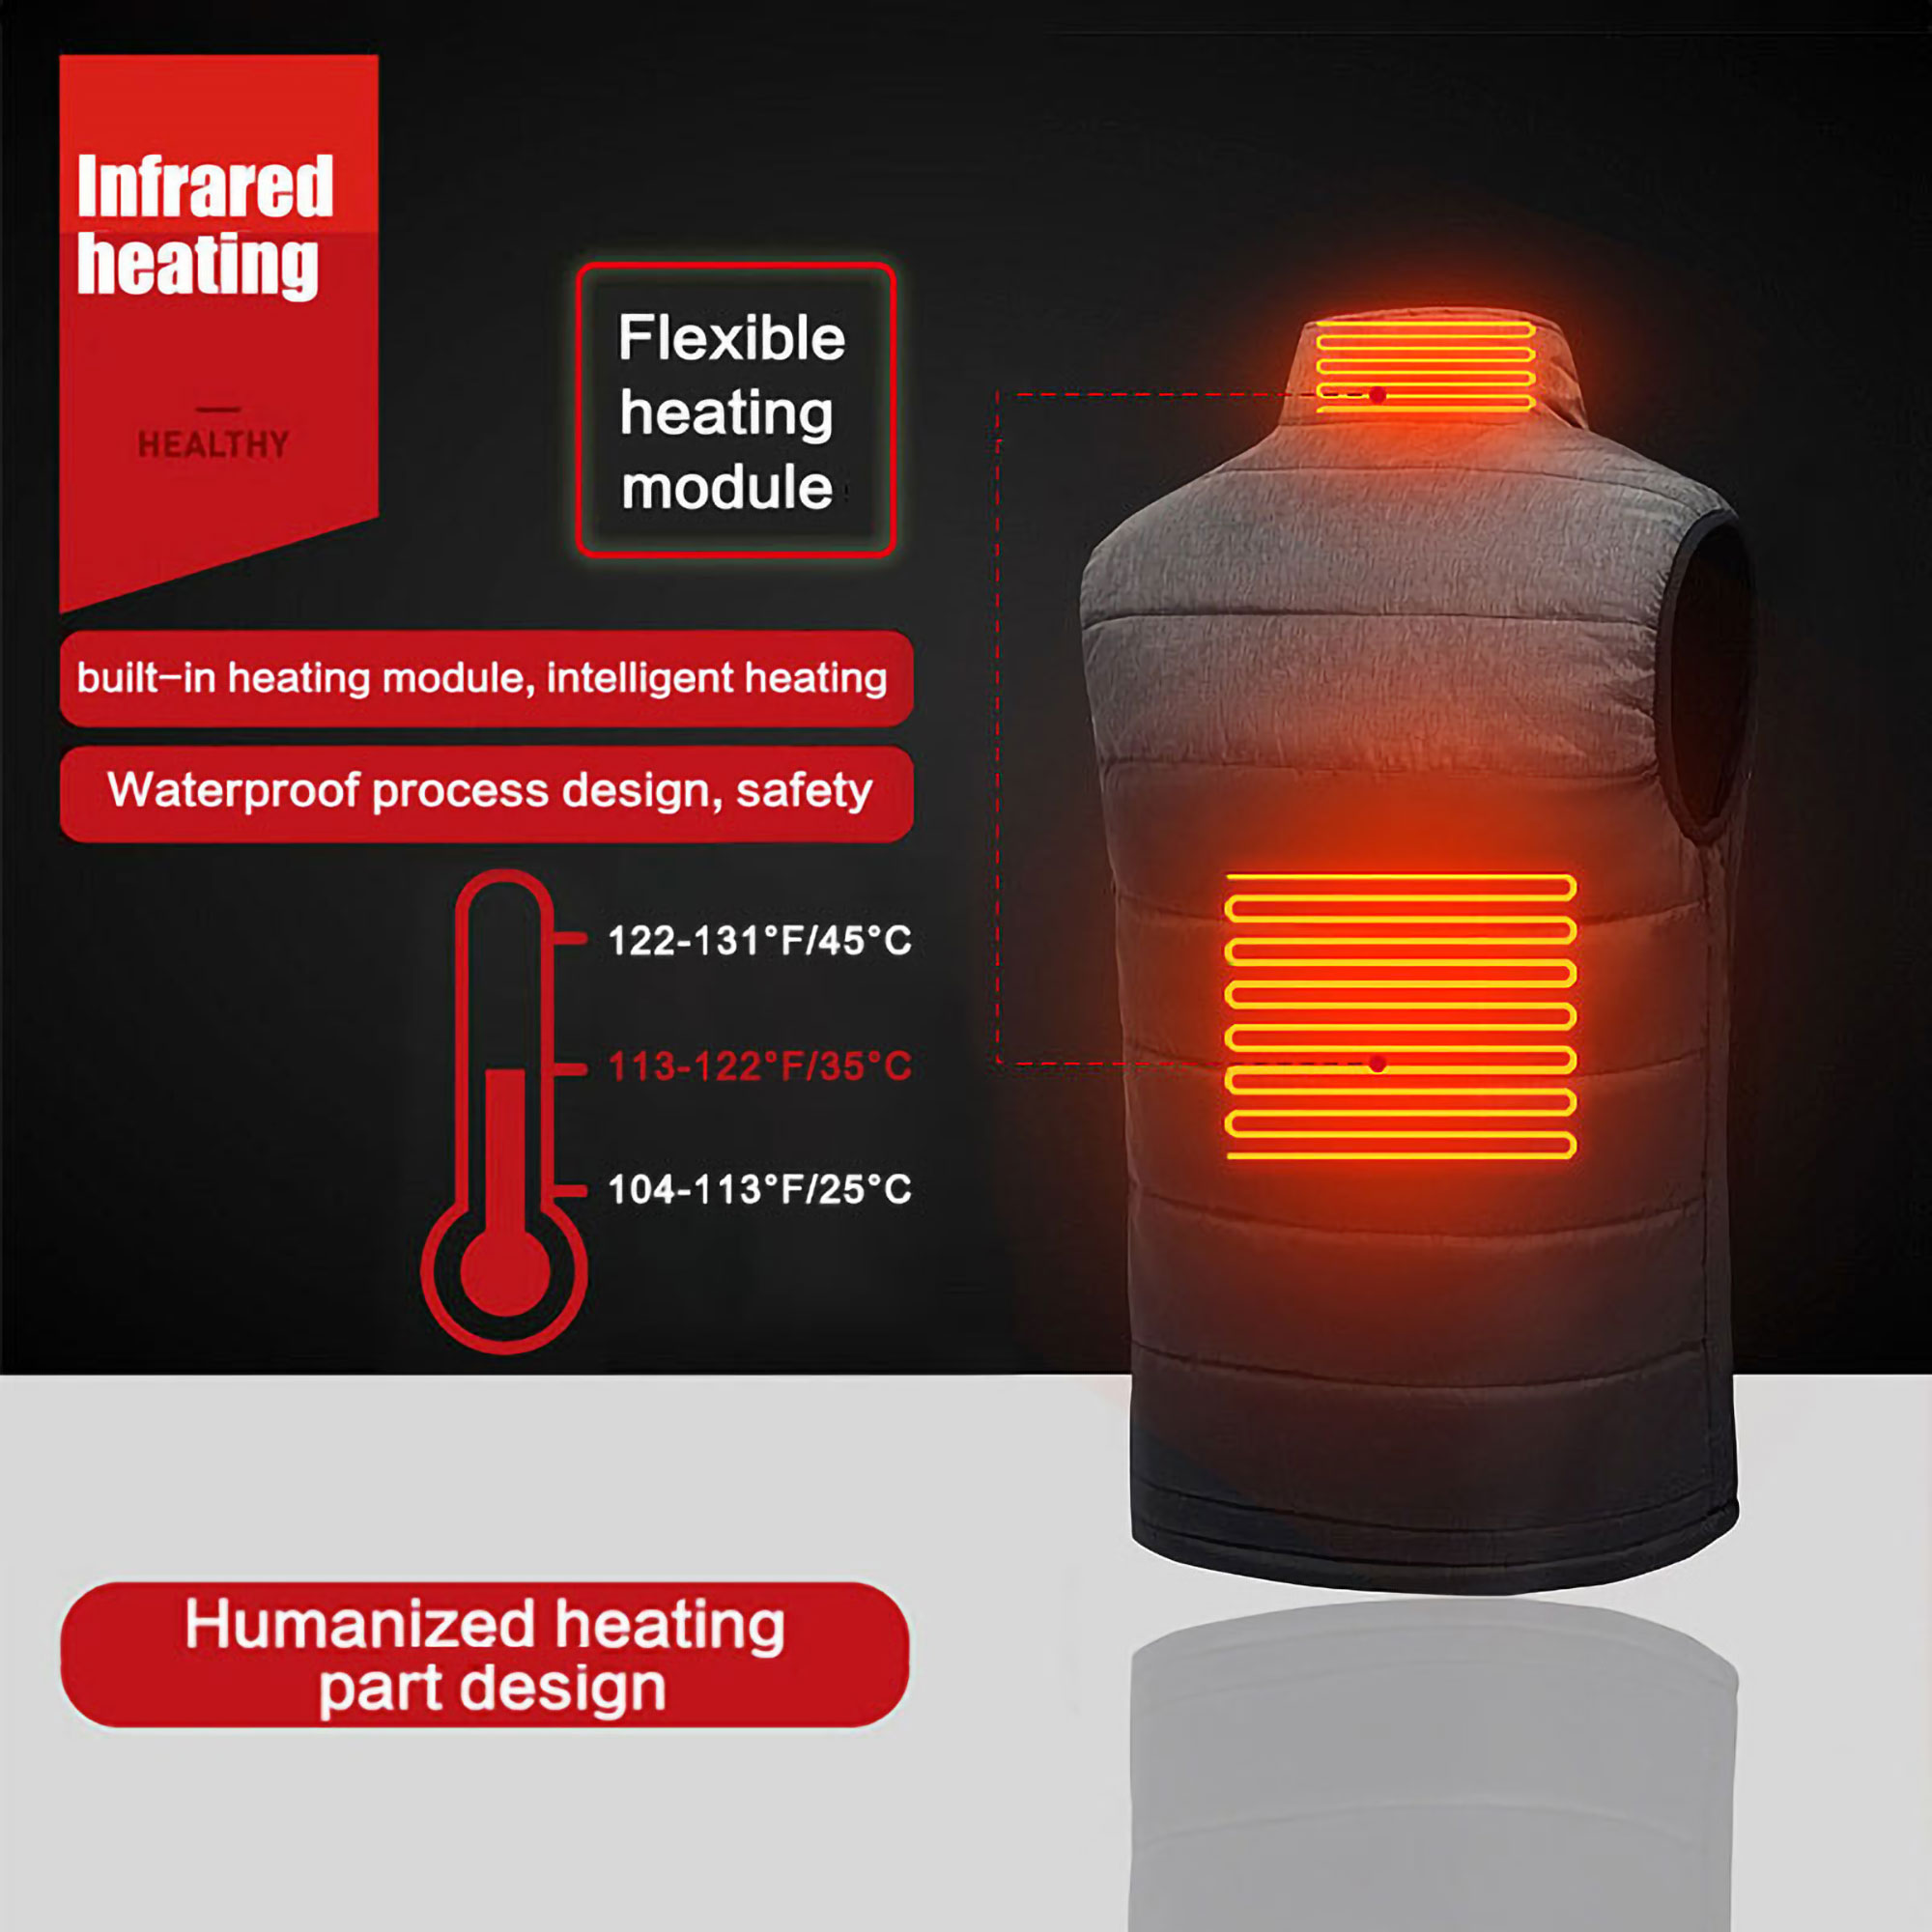 Sexy Dance Electric Thermal Heated Vest for Men Women Sleeveless Zipper Heating Jacket Lightweight Warmth Outwear With Battery Pack - image 5 of 11